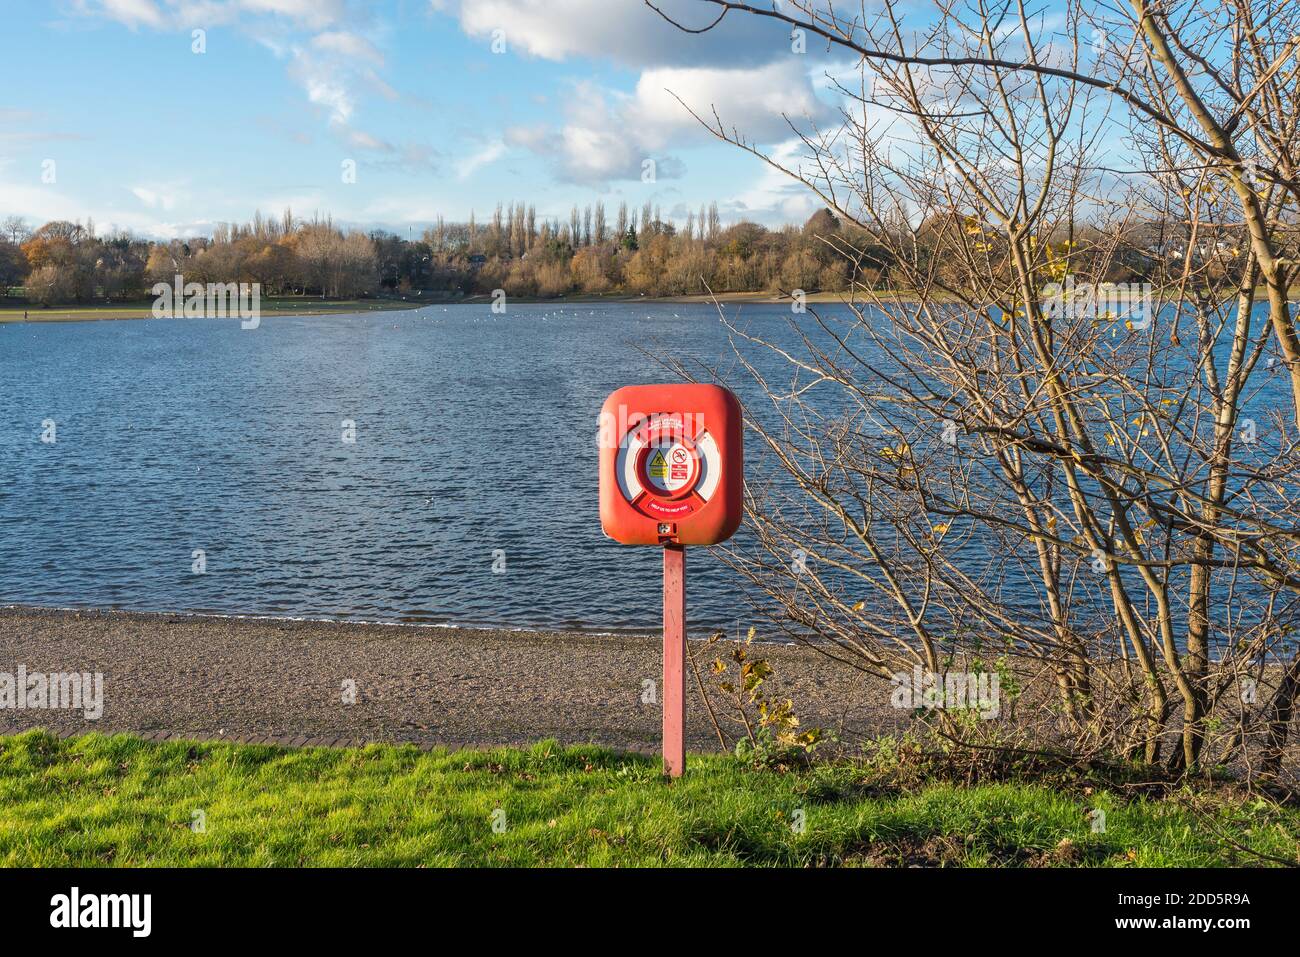 Life buoy beside Edgbaston reservoir which is a feeder reservoir for the canal network in Birmingham, UK Stock Photo